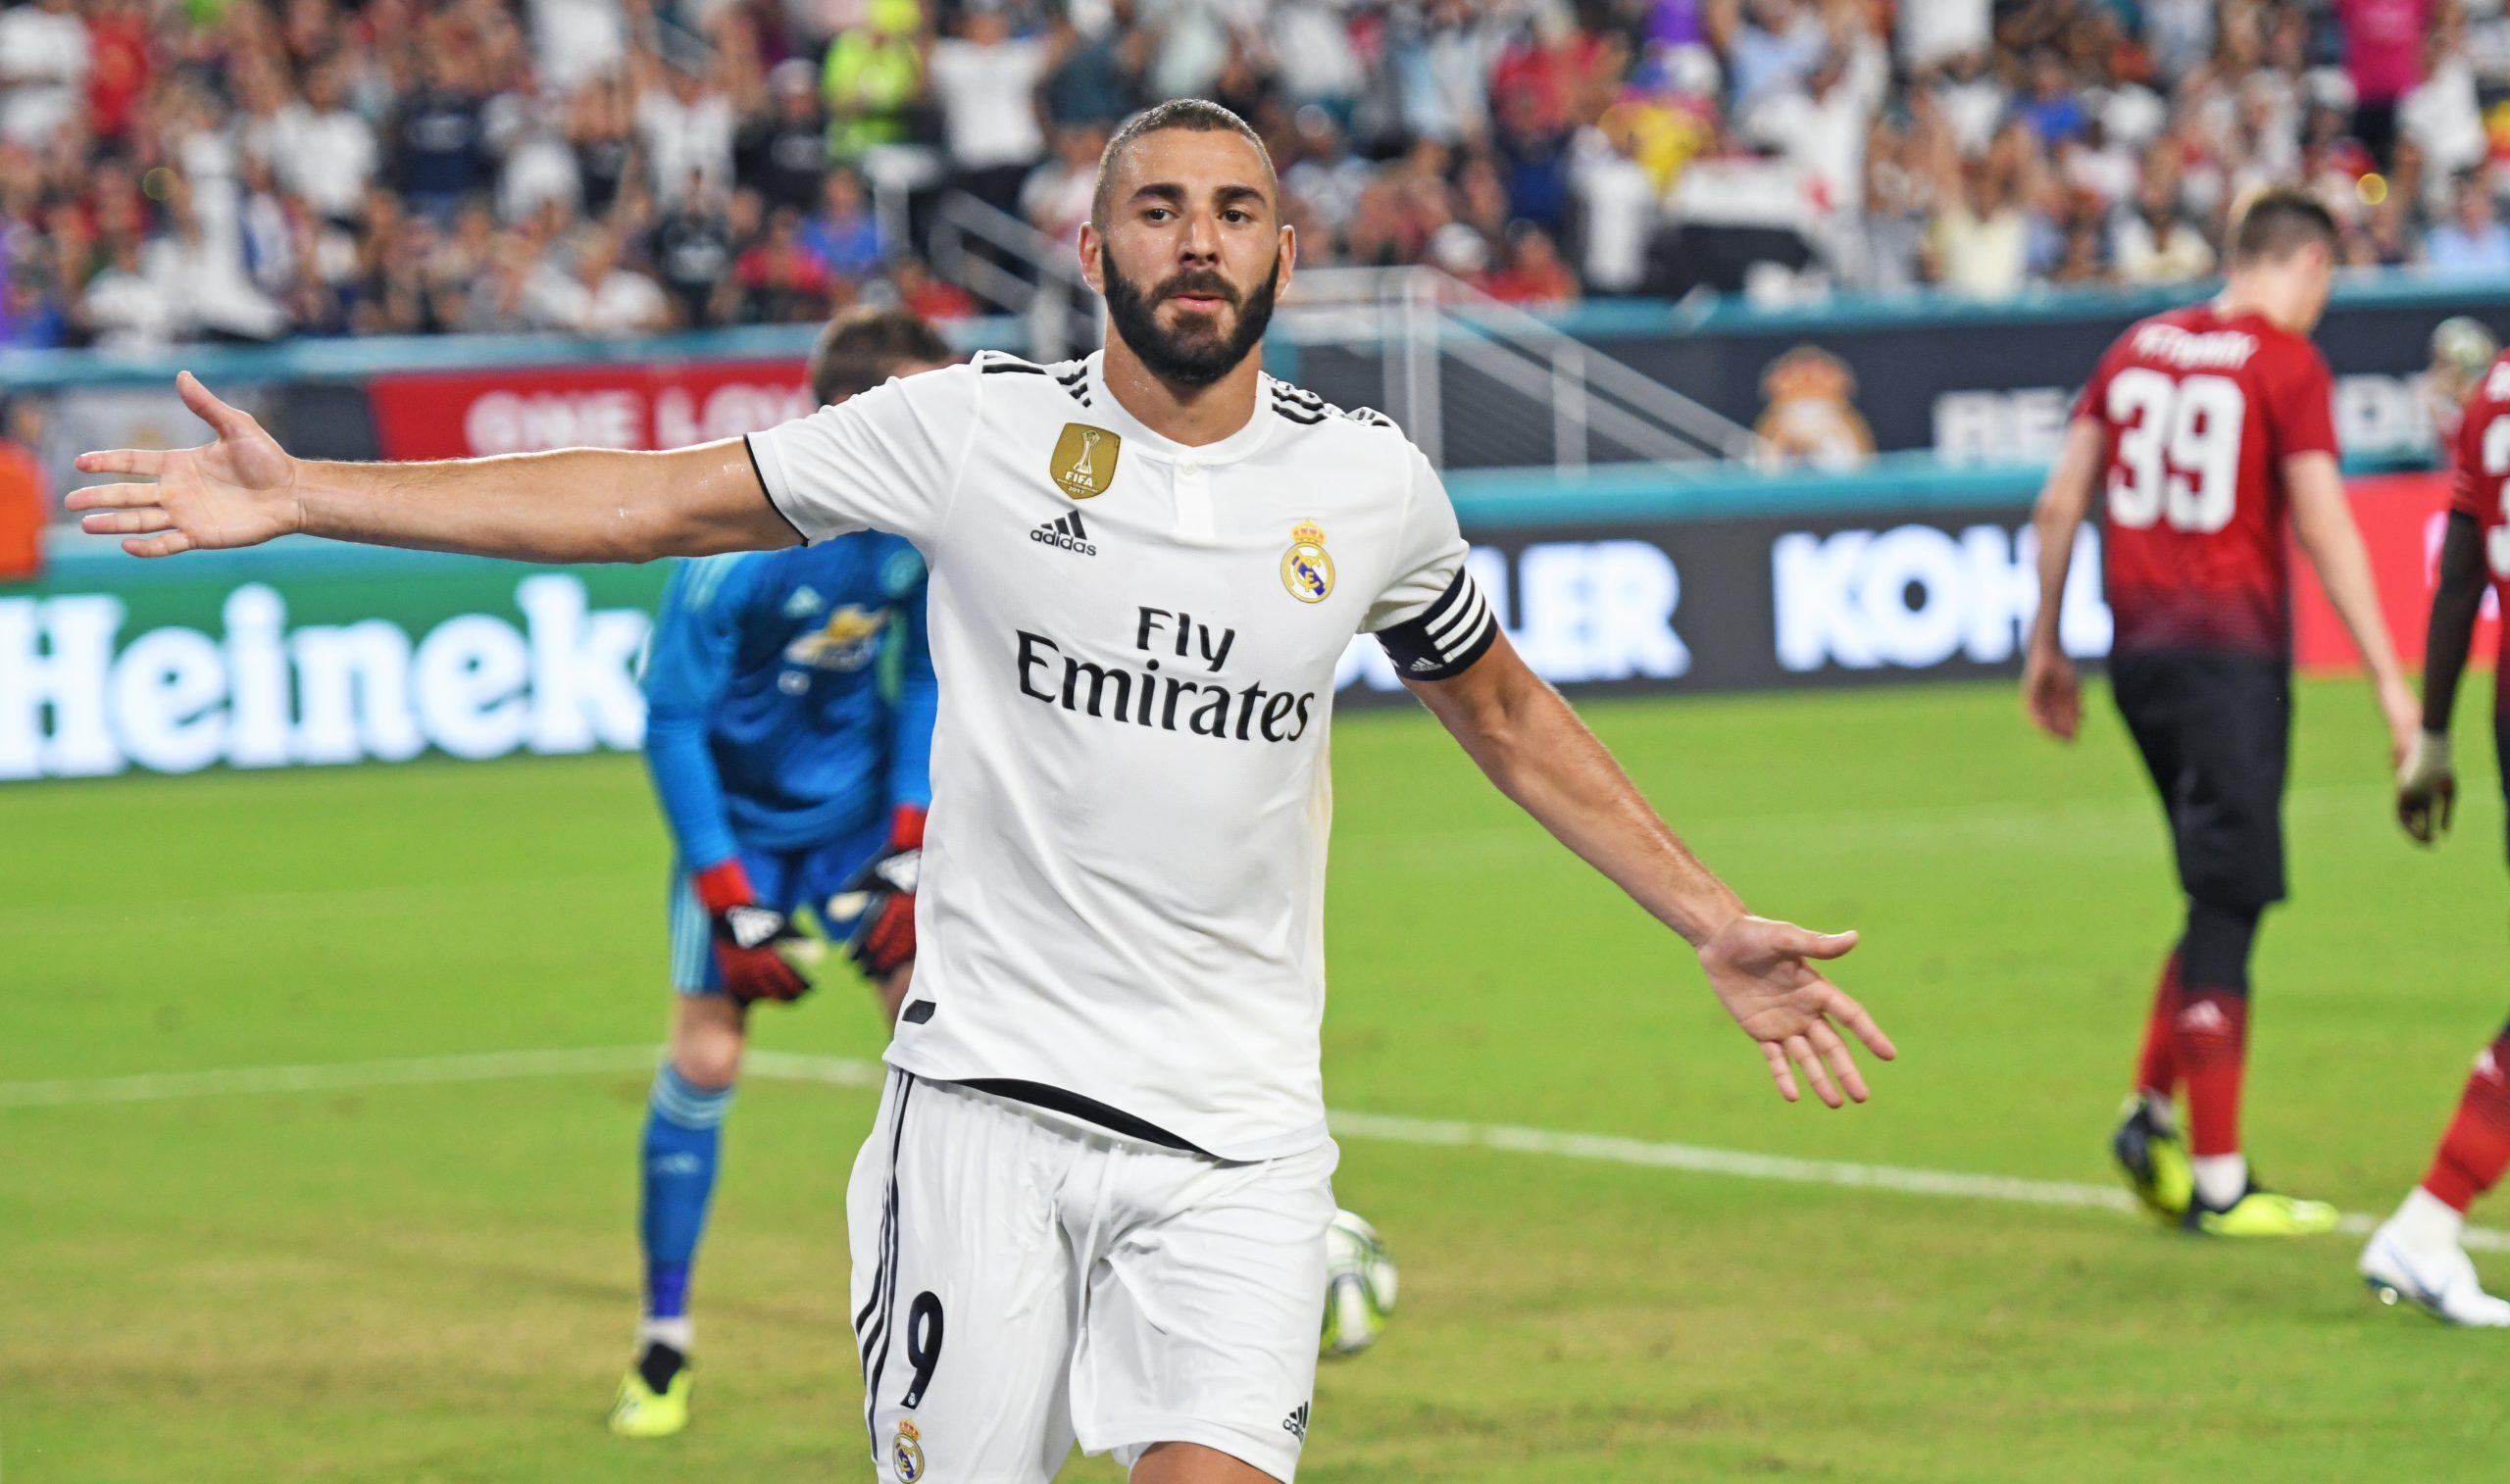 Karim Mostafa Benzema of Real Madrid celebrates a goal past David de Gea of Manchester United in the first half during International Champions Cup action at Hard Rock Stadium in Miami Gardens, Fla., on Tuesday, July 31, 2018. Manchester United won, 2-1. (Jim Rassol/Sun Sentinel/TNS)